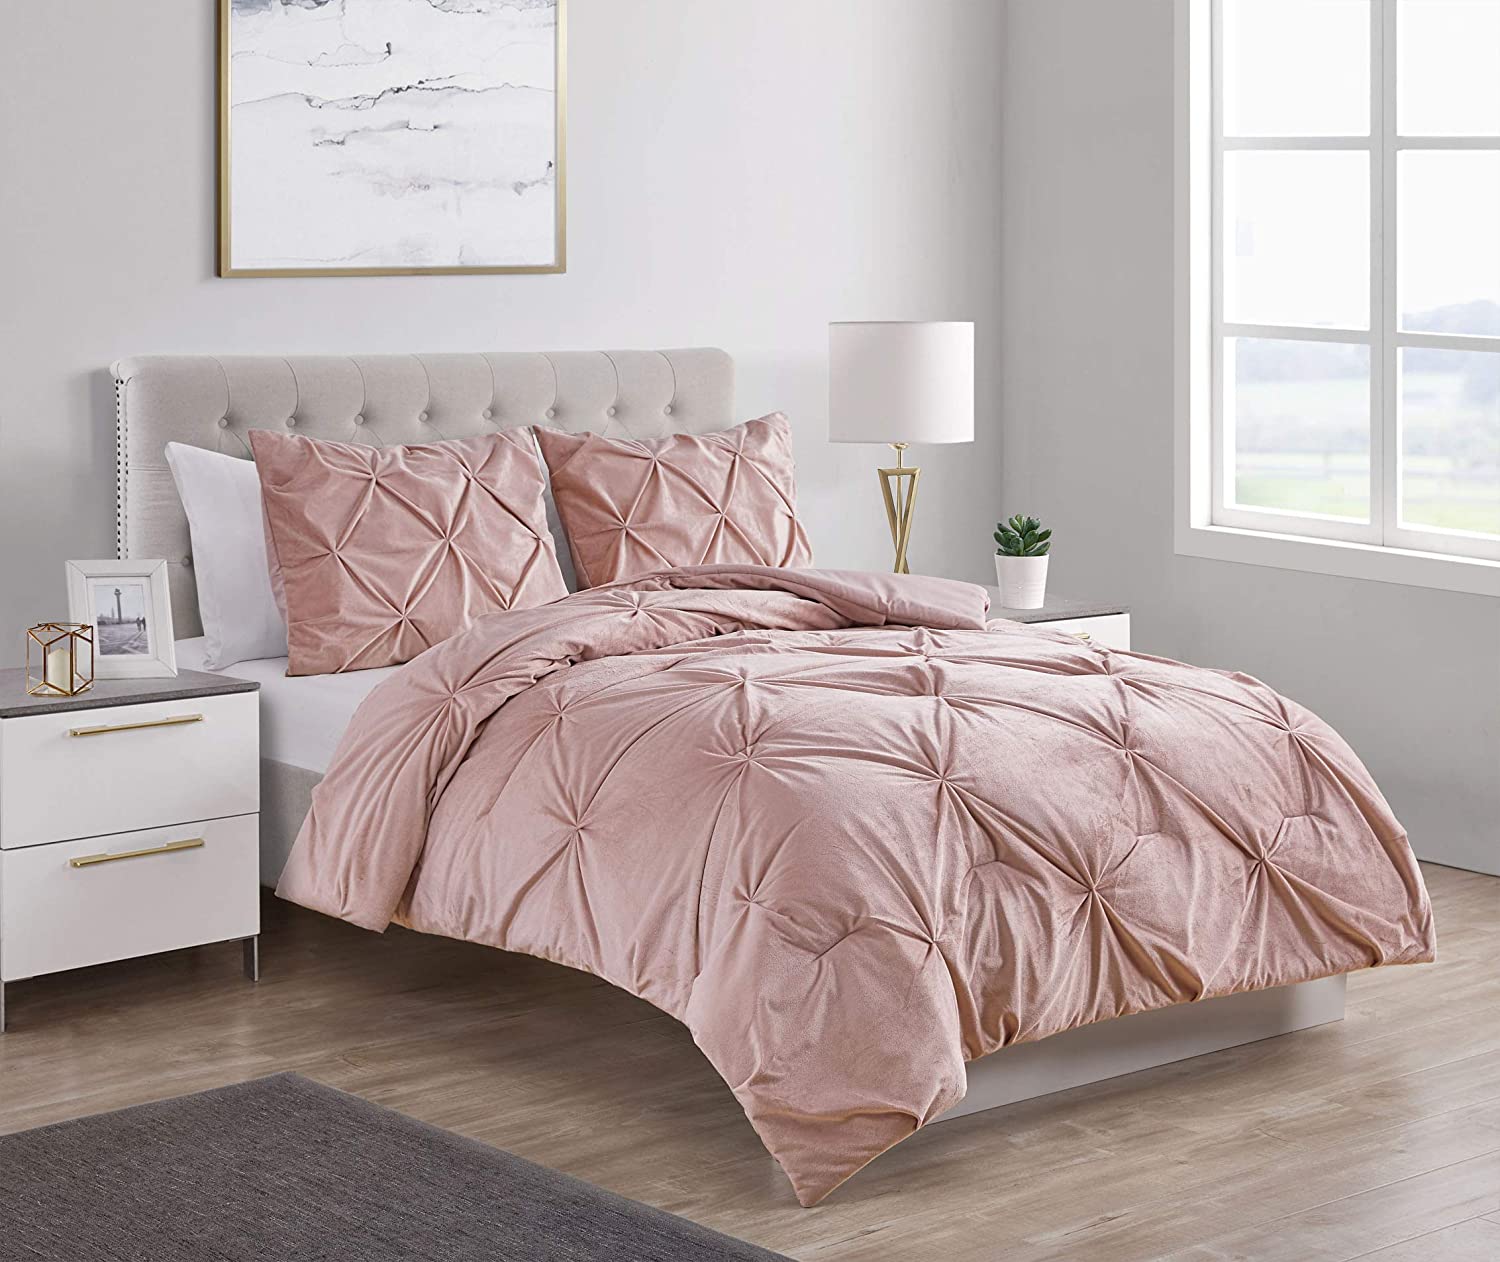 Details about   VCNY HomeCarmen CollectionSuper Soft Microfiber Comforter Cozy and Relaxi 